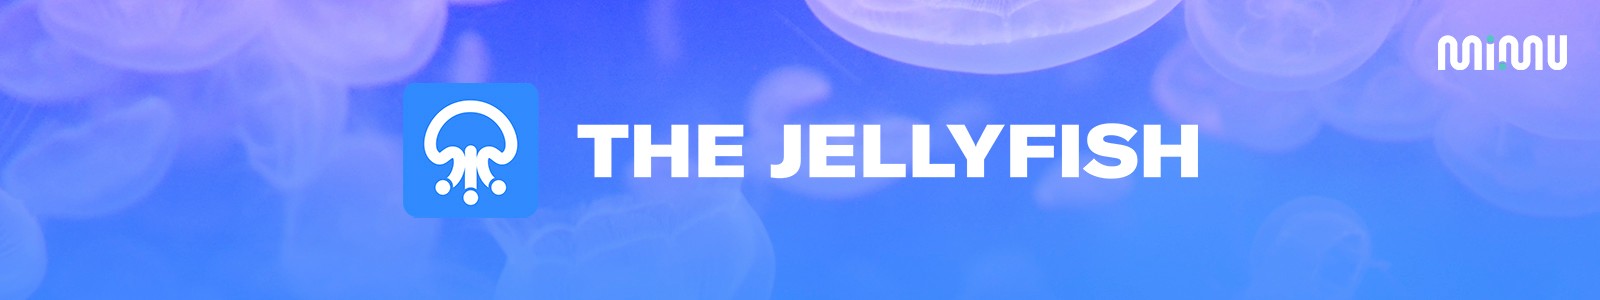 The Jellyfish by MiMU Gloves